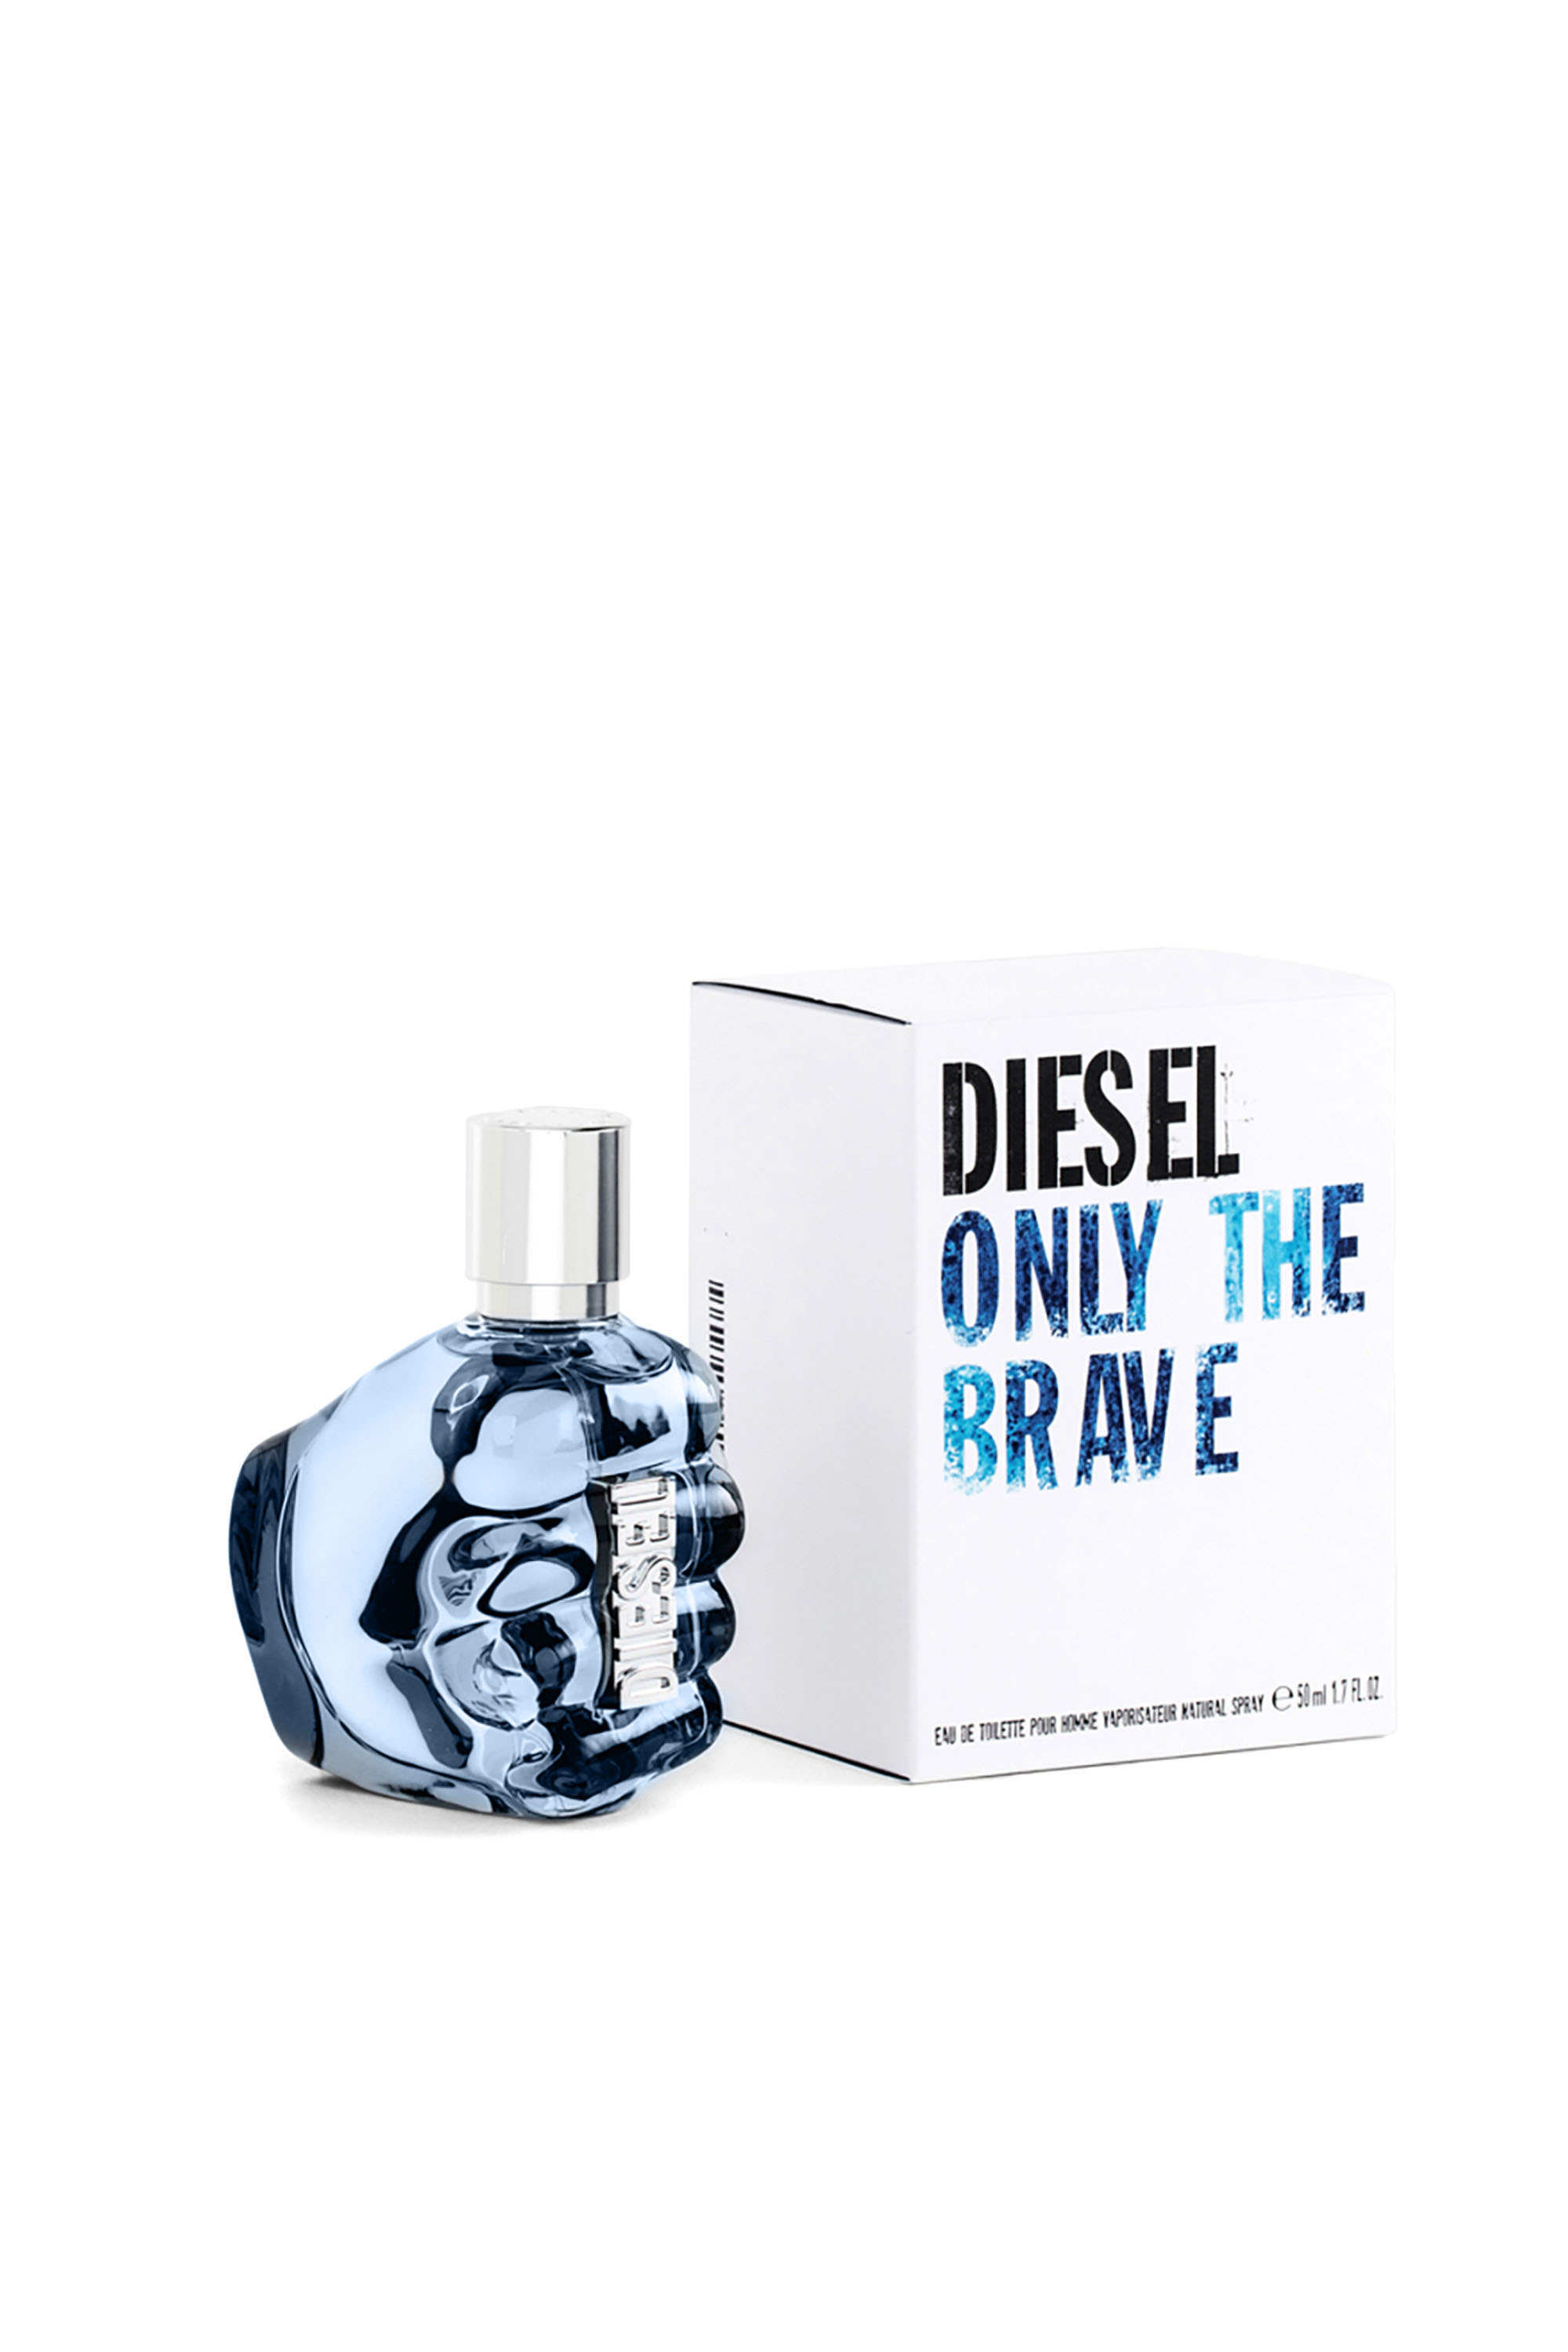 Diesel - ONLY THE BRAVE 50ML, Male Only The Brave 50ml, 1.7 FL.OZ., Eau de Toilette in ブルー - Image 2